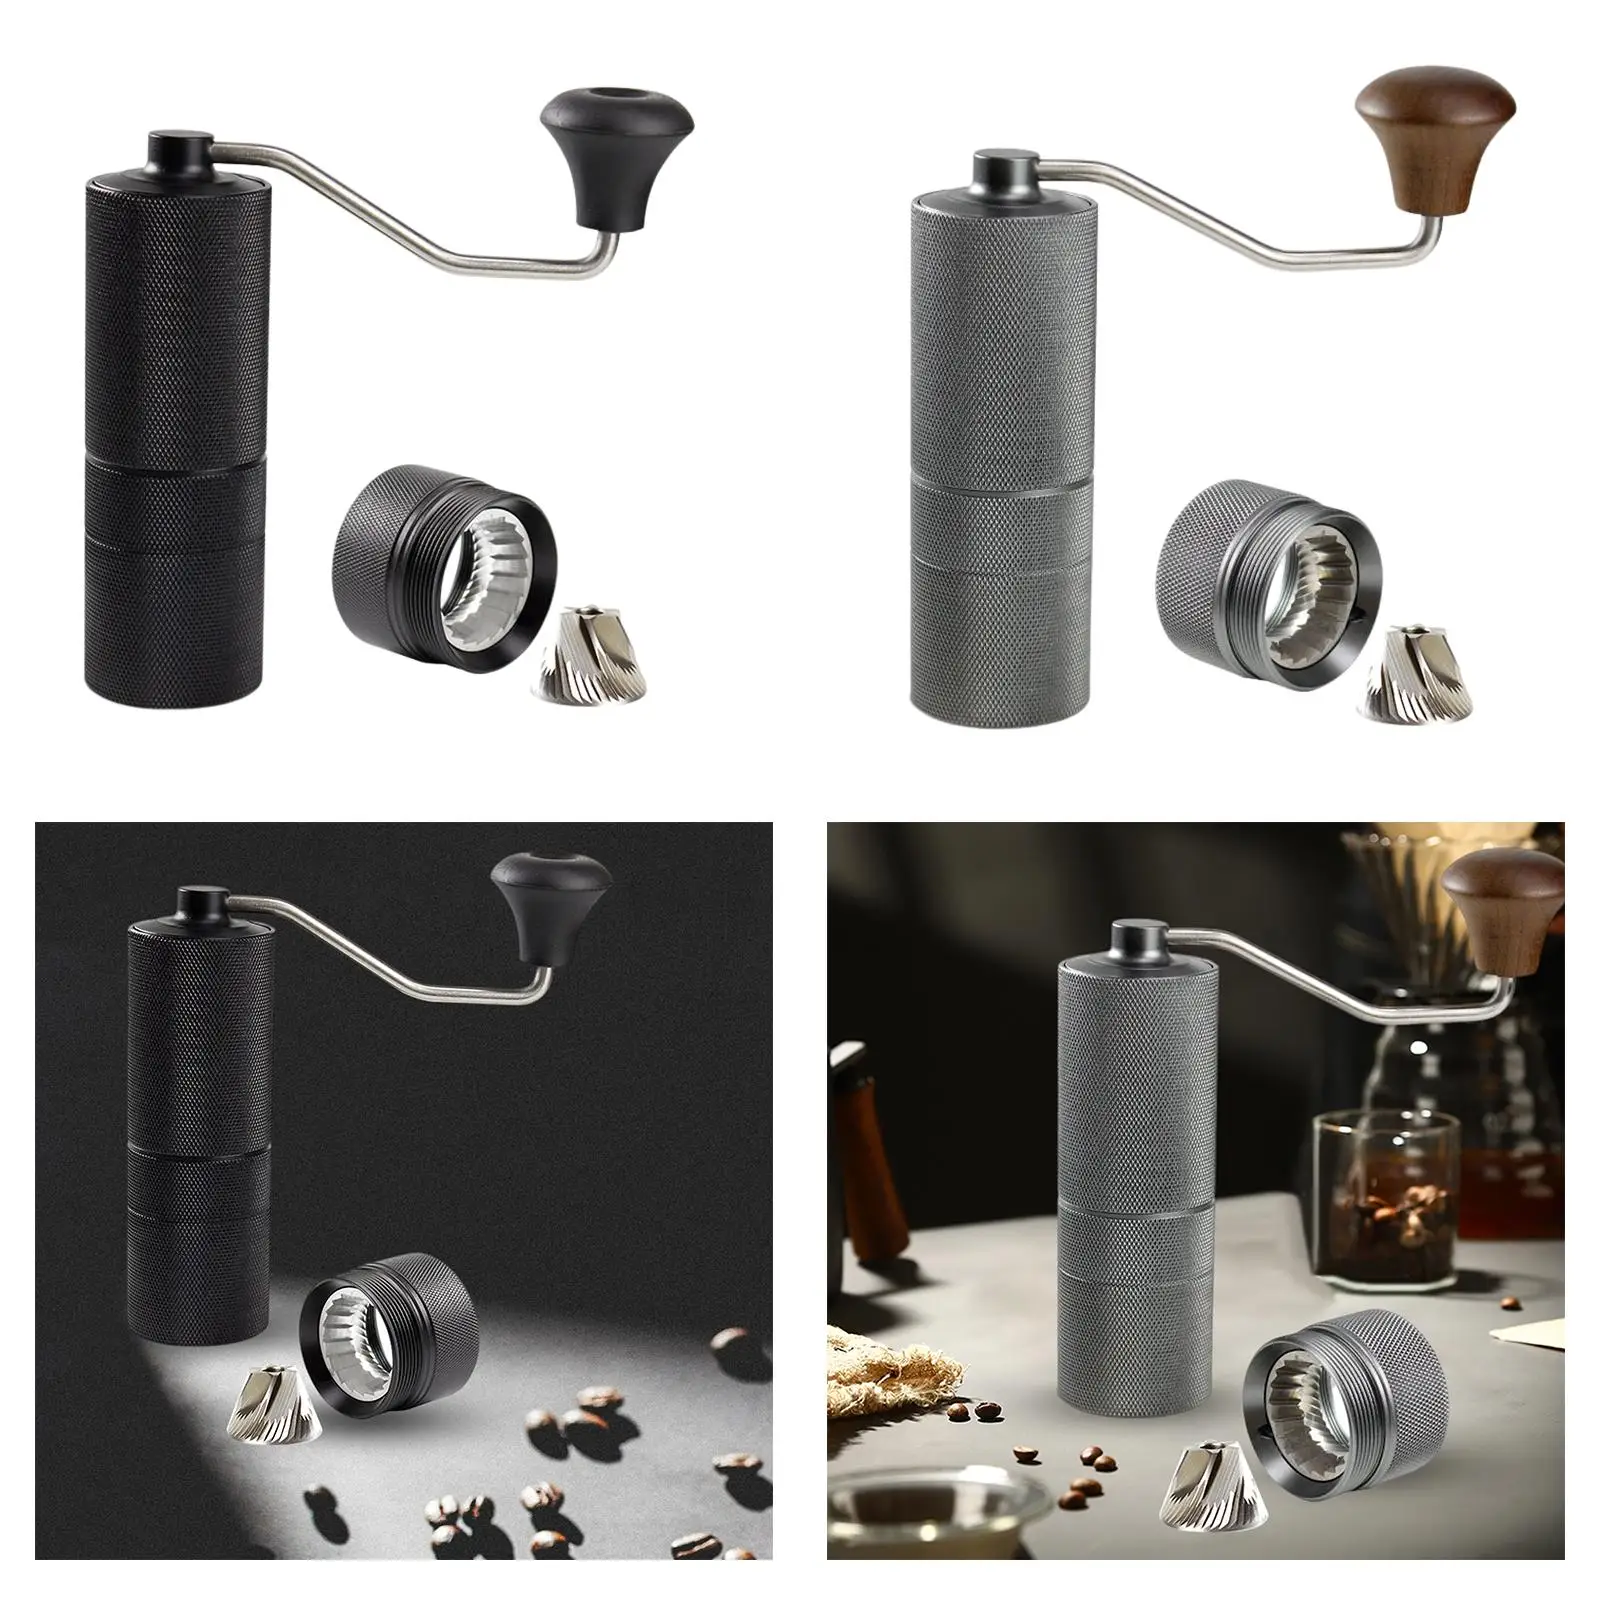 Handheld Manual Coffee Mill Hand Crank Coffee Mill with Adjustable Coarseness Settings for Cafe